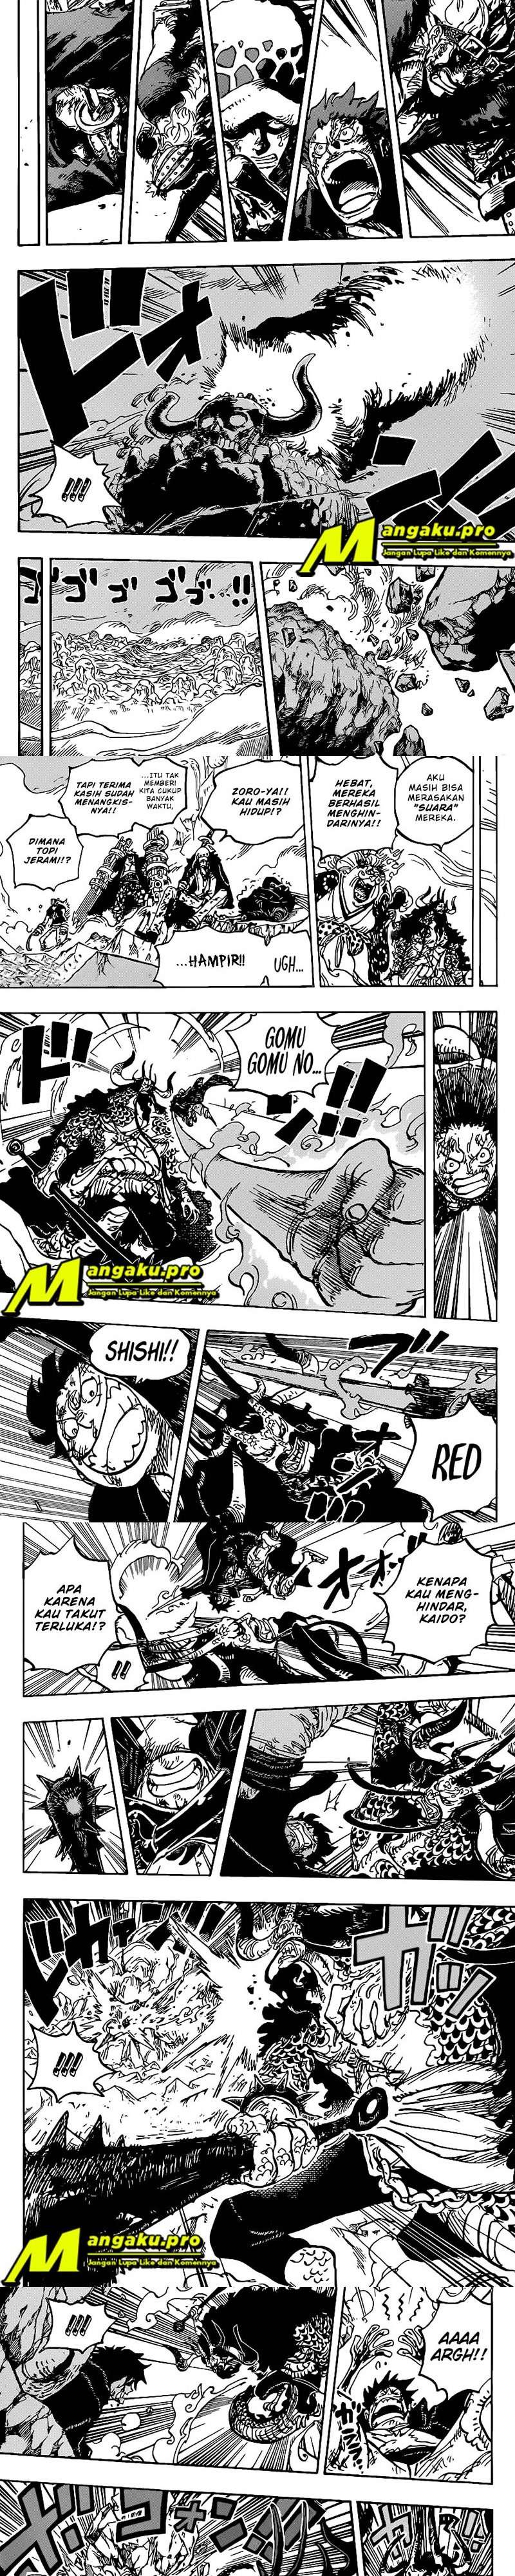 One Piece Chapter 1009 Hq - 67